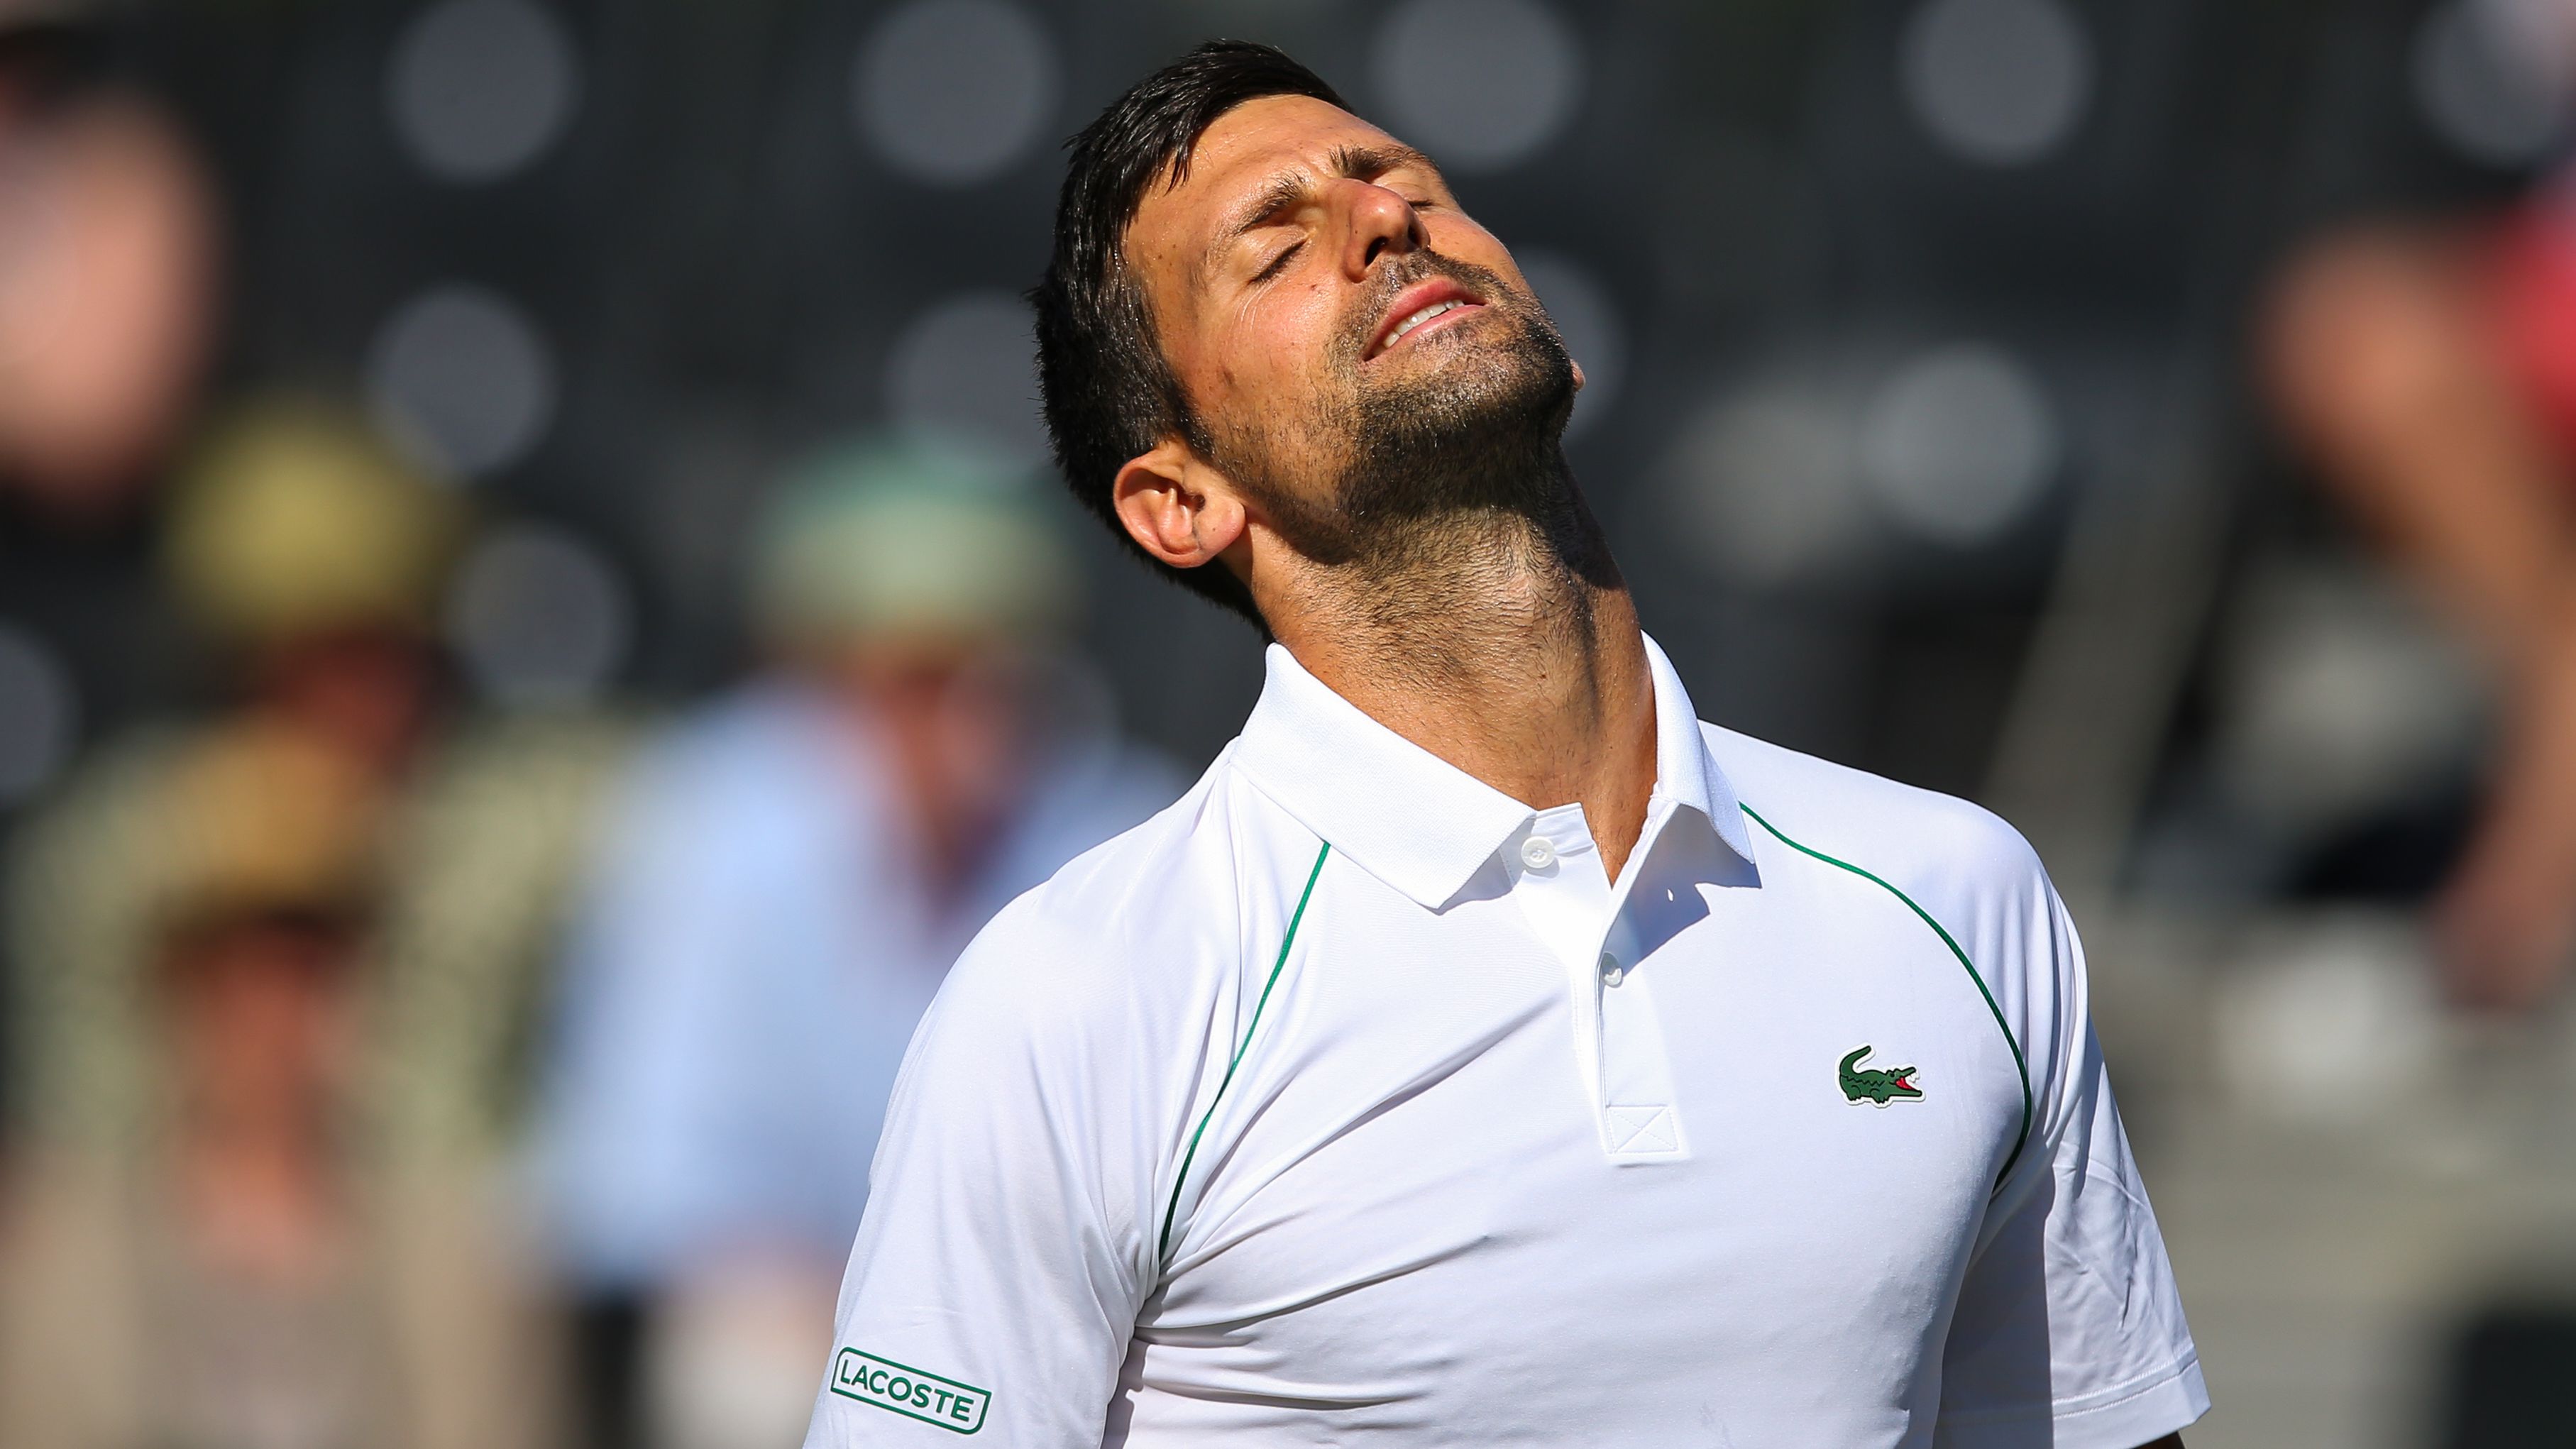 Novak Djokovic won't get vaccine, will be blocked from contesting the US Open